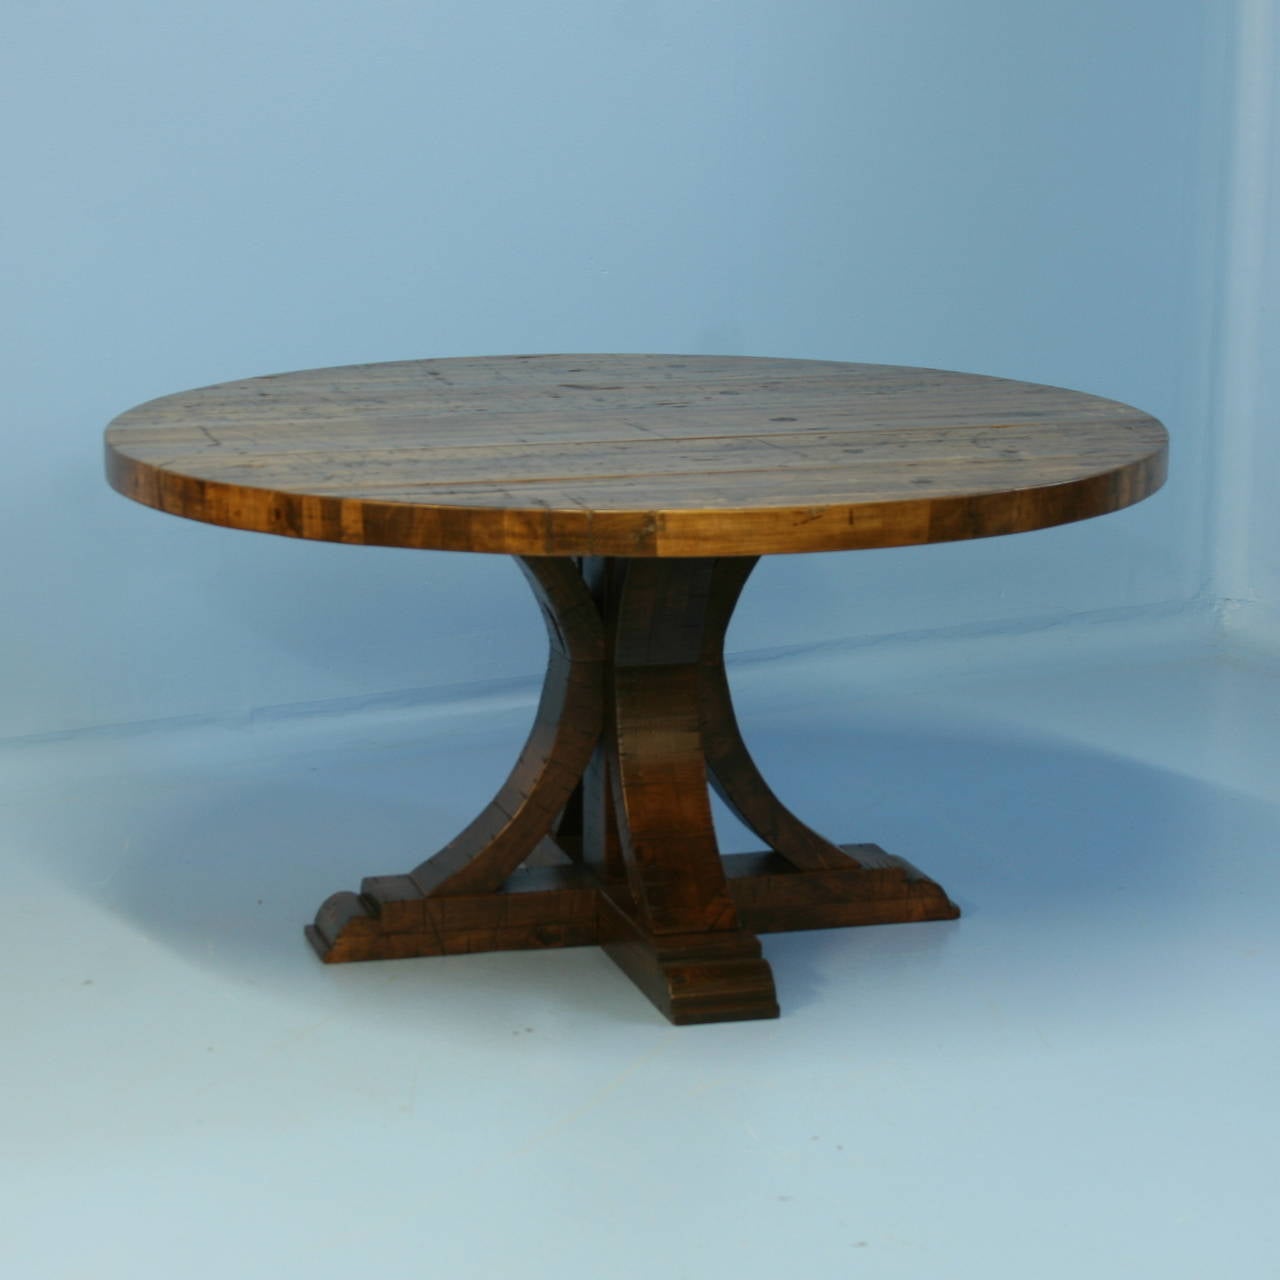 The strong visual impact of this table is due to the reclaimed wood top and architectural feel of the pedestal base. The top is made from reclaimed railroad cart/boxcar wood so it shows the wear and distress of constant years of use. The top is